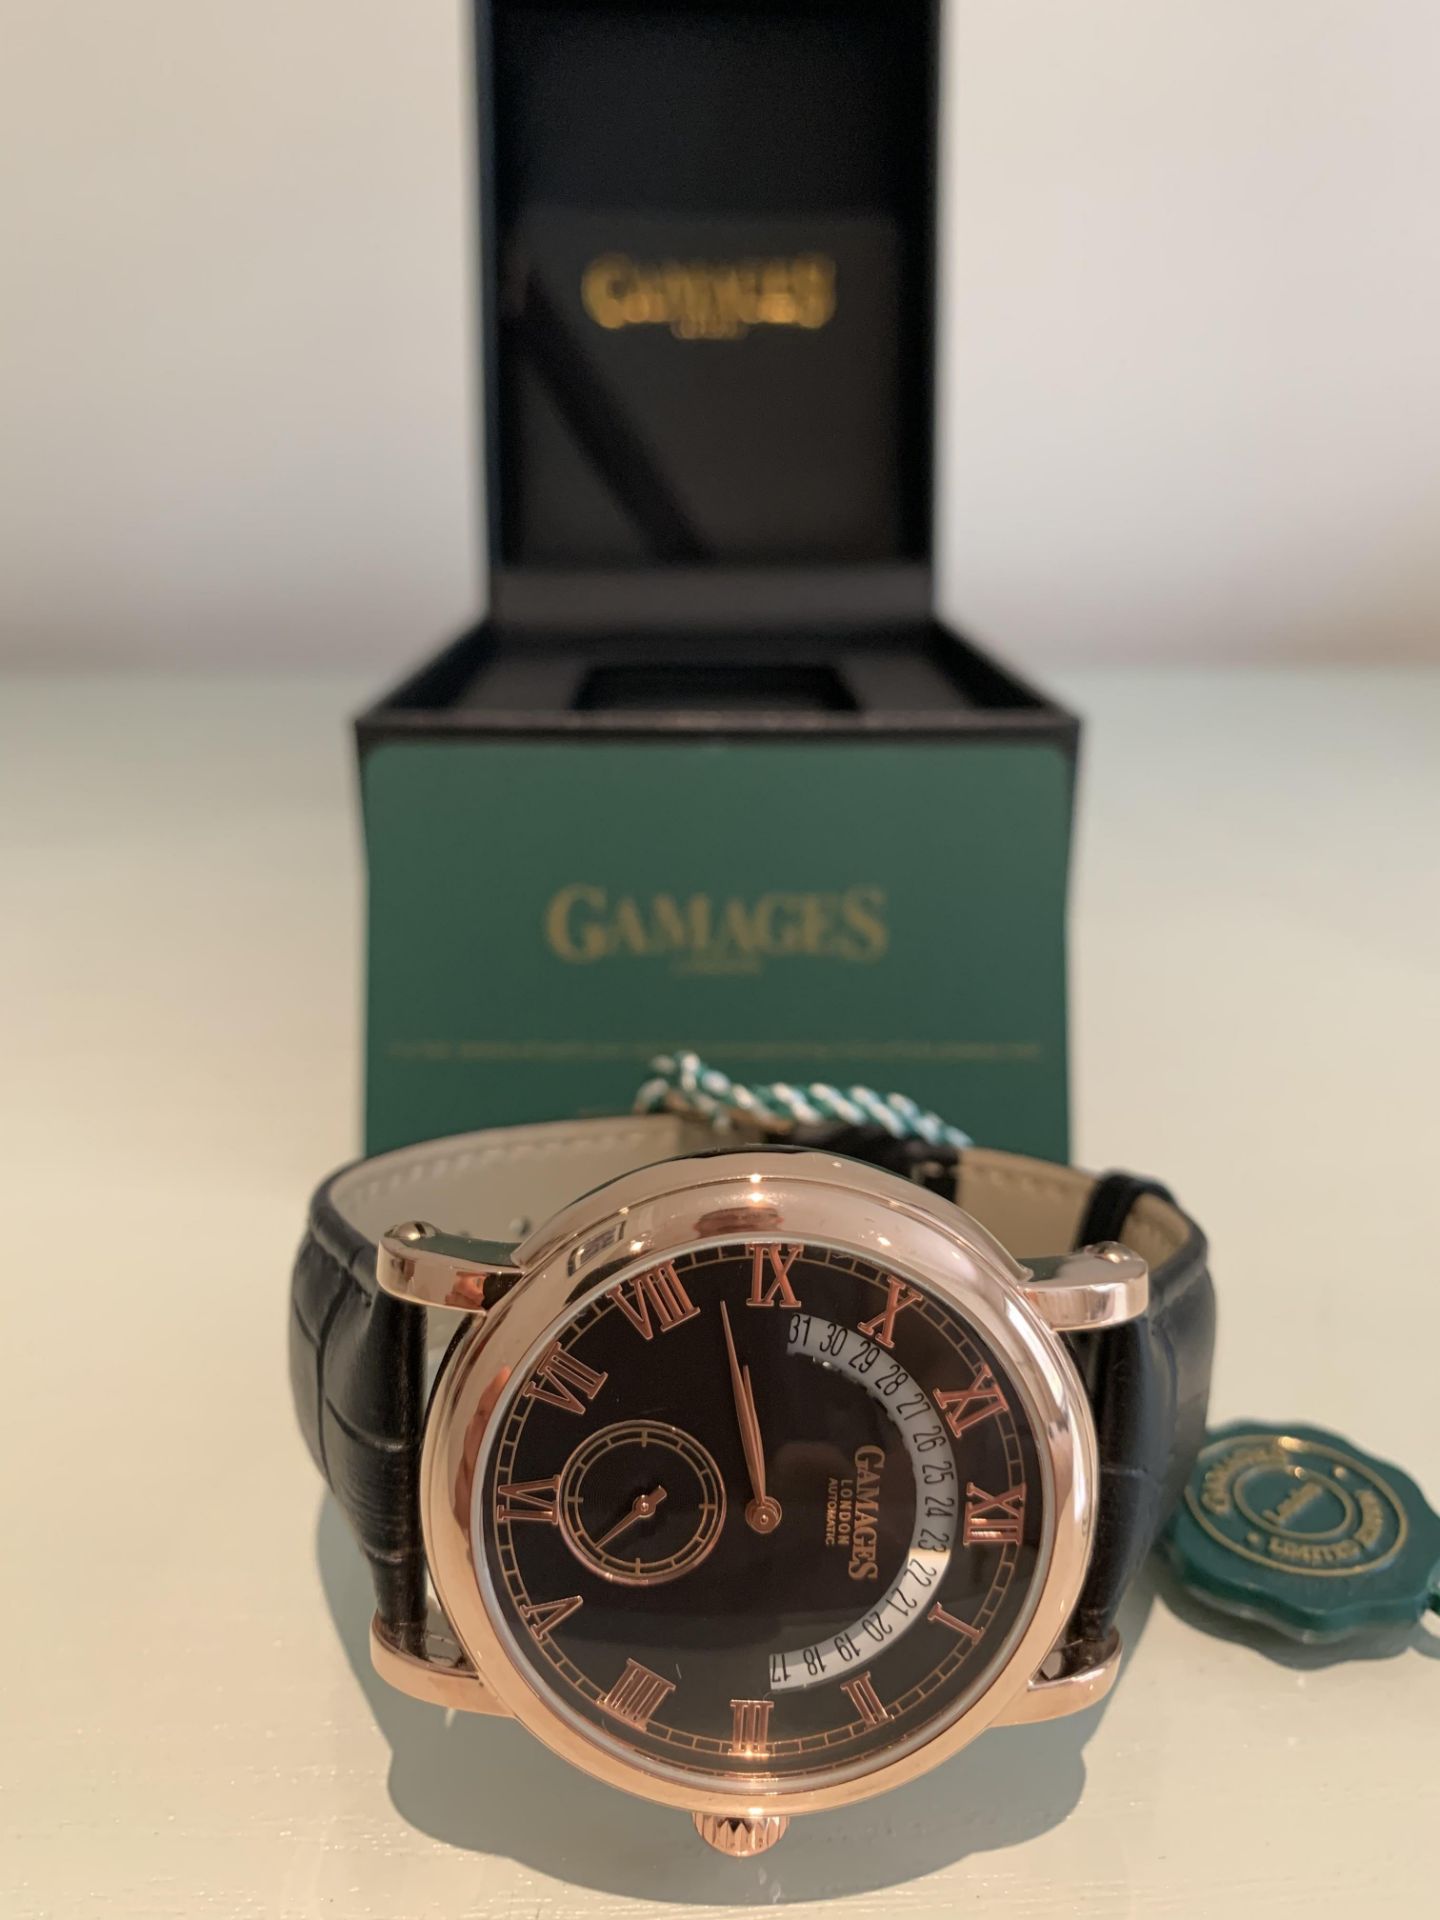 Limited Edition Hand Assembled GAMAGES Split Date Automatic Rose – 5 Year Warranty & Free Delivery - Image 2 of 10